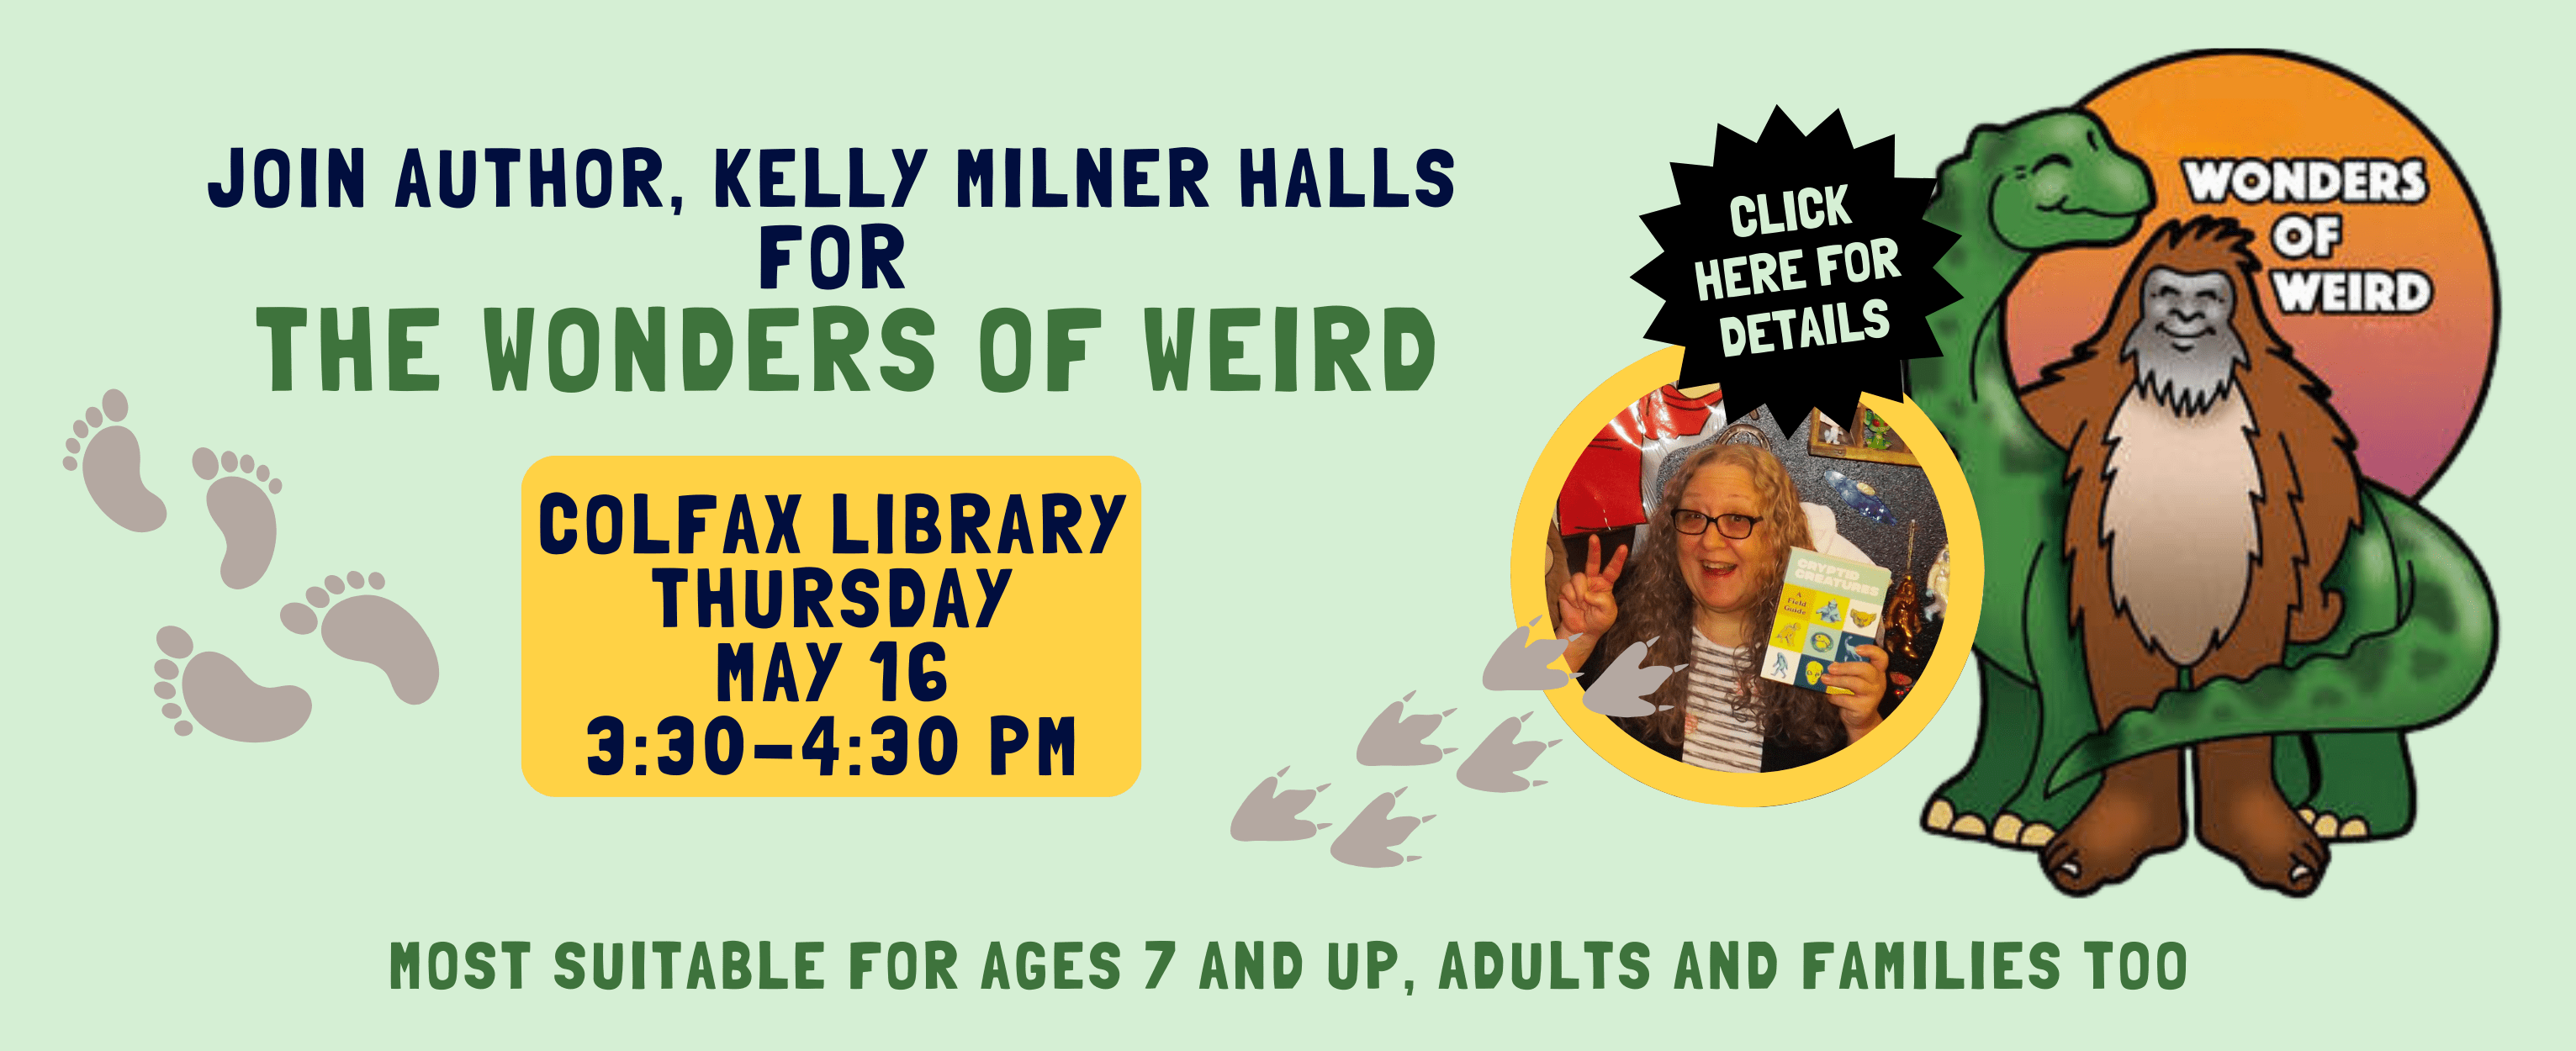 Families and kids ages 7 and up are invited for Wonders of Weird with local author Kelly Milner Halls on Thursday, May 16 at 3:30 PM. Click here for details!